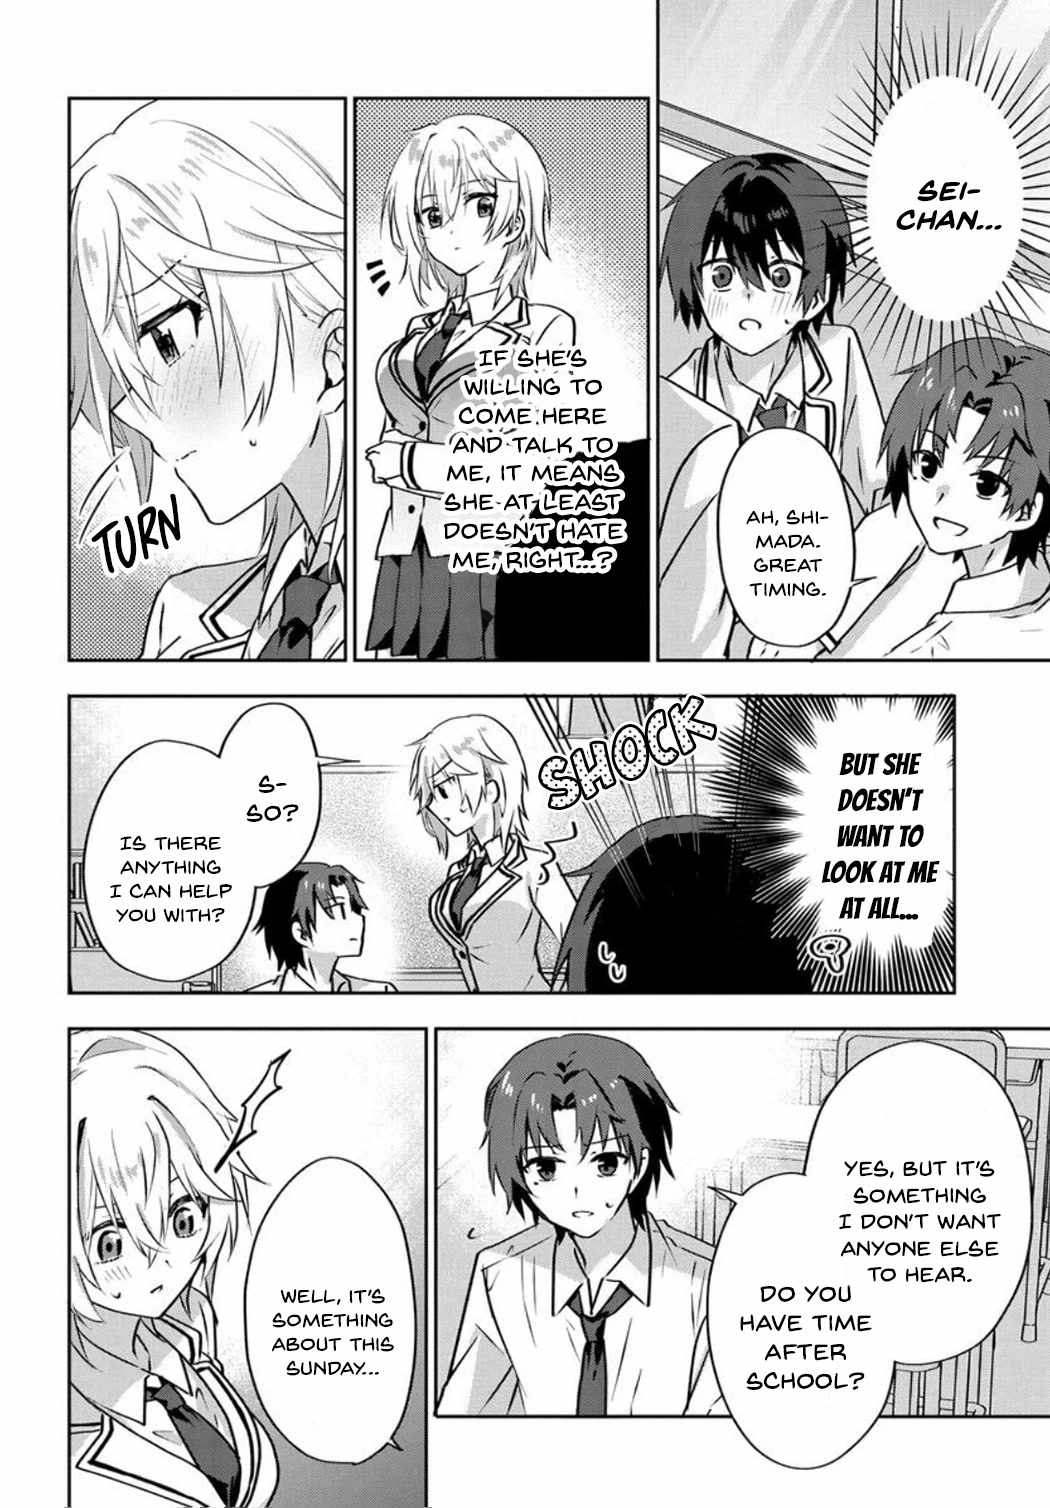 Since I’Ve Entered The World Of Romantic Comedy Manga, I’Ll Do My Best To Make The Losing Heroine Happy Chapter 3 #18